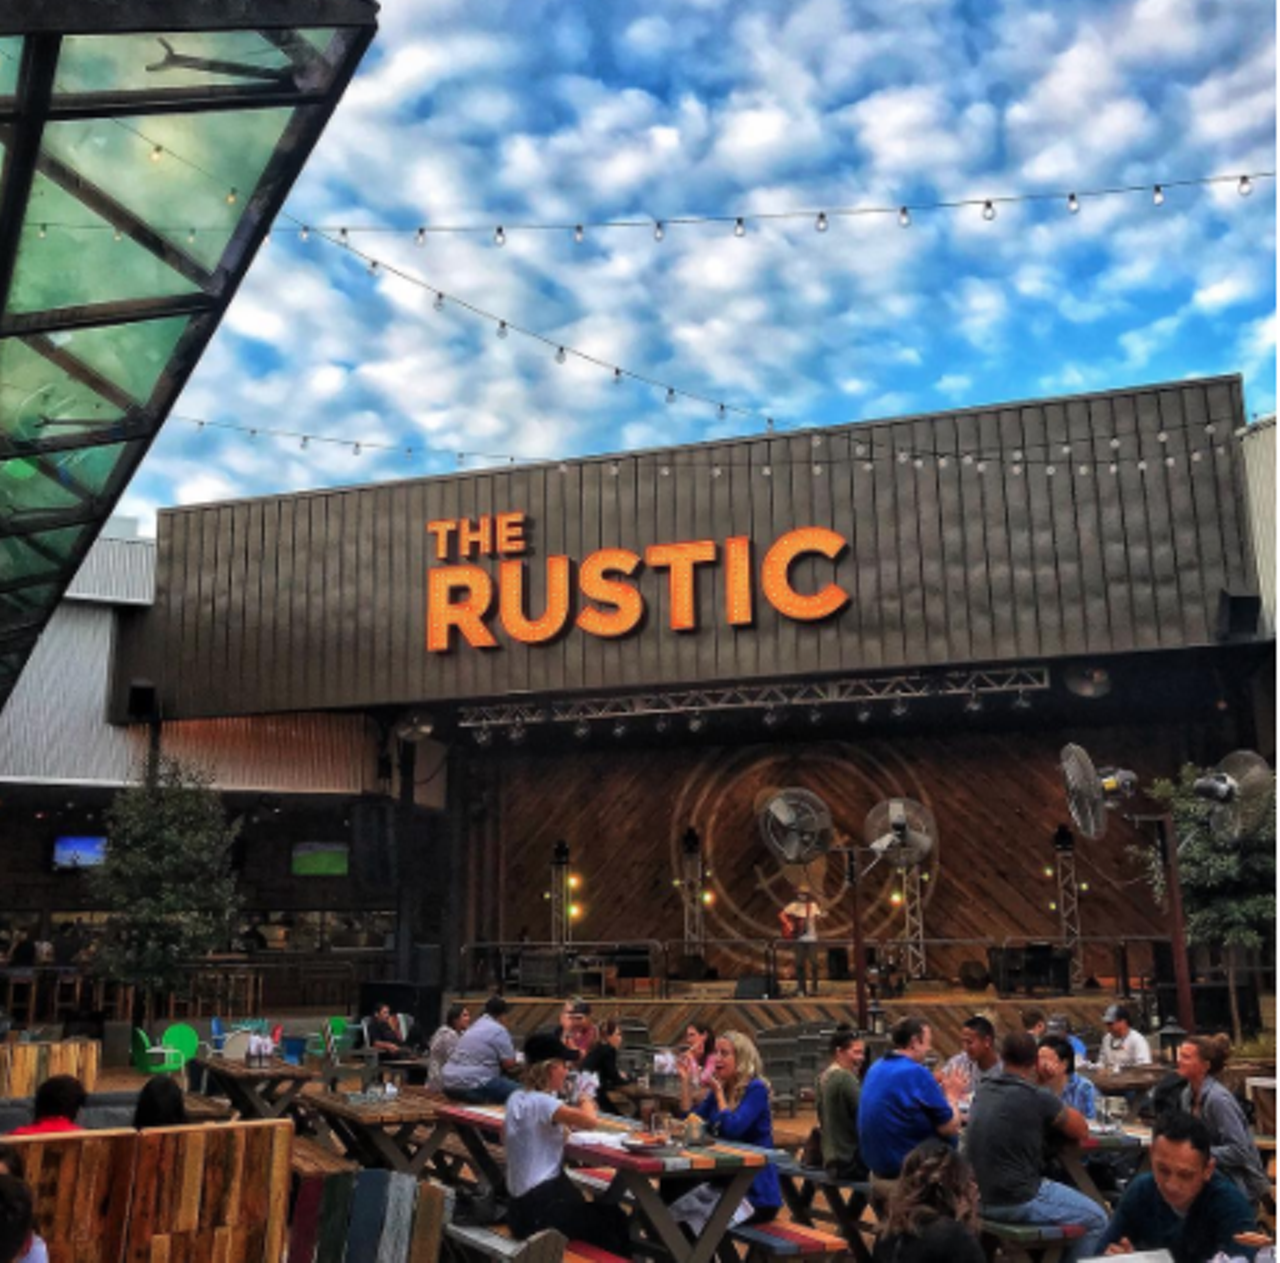 The Rustic
17619 La Cantera Pkwy., Suite 204, (210) 245-7500, therustic.com
Country fans will probably spend most evenings at The Rustic, with live music basically every night and a full bar and kitchen. RIP Cowboys Dancehall (Don't @ us.) 
Photo via Facebook, trustartz